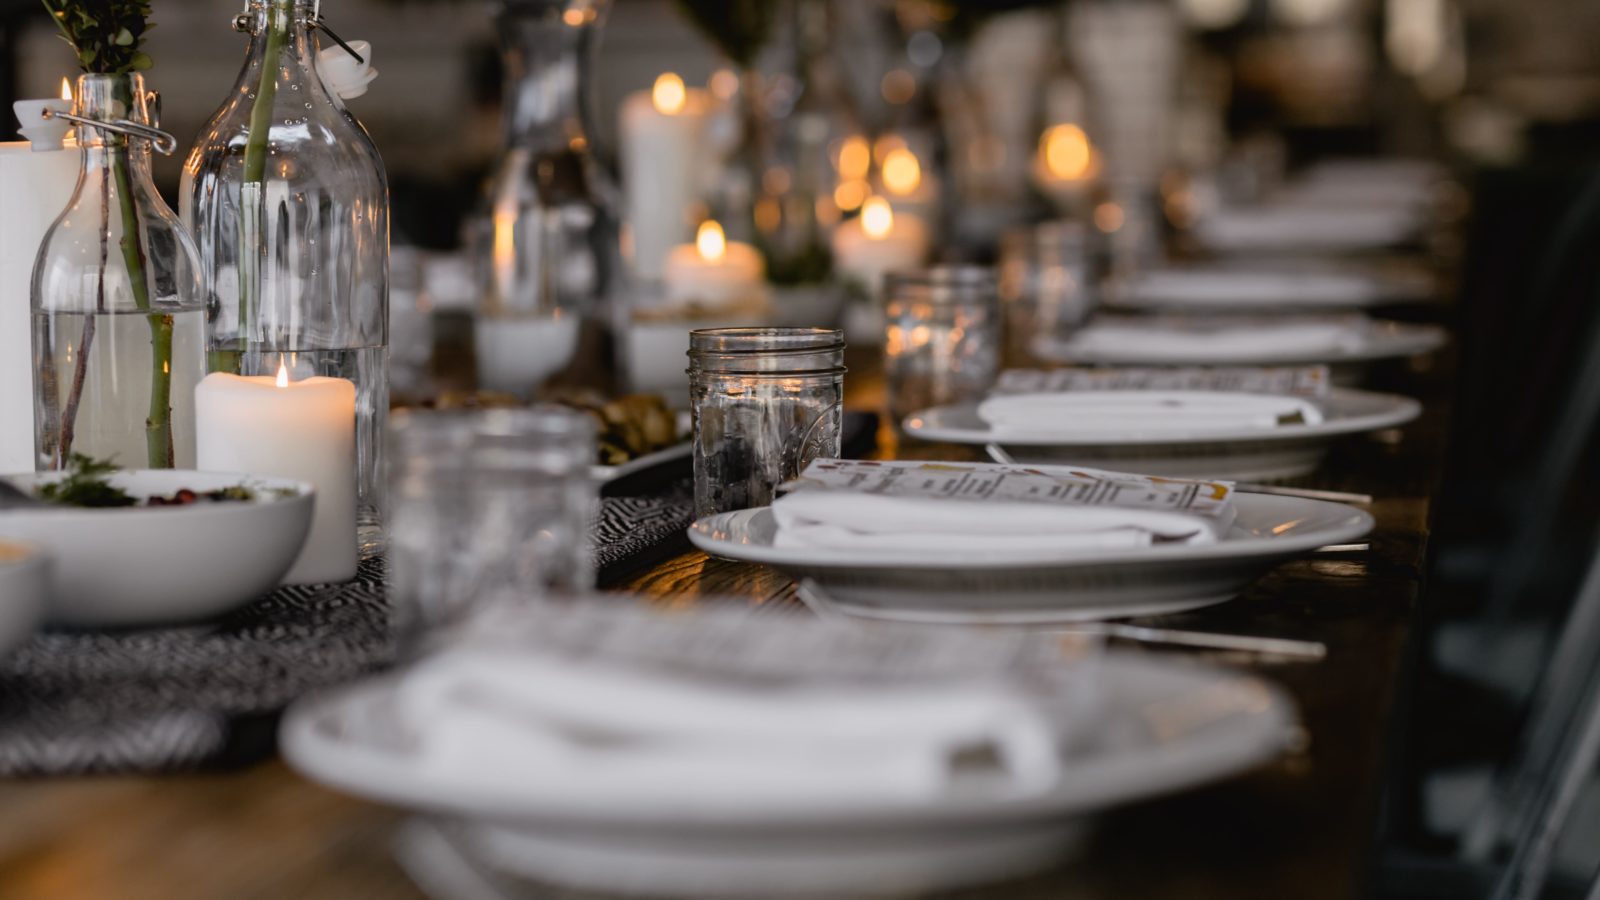 A long row of fancy table settings and a table centerpiece of softly glowing candles